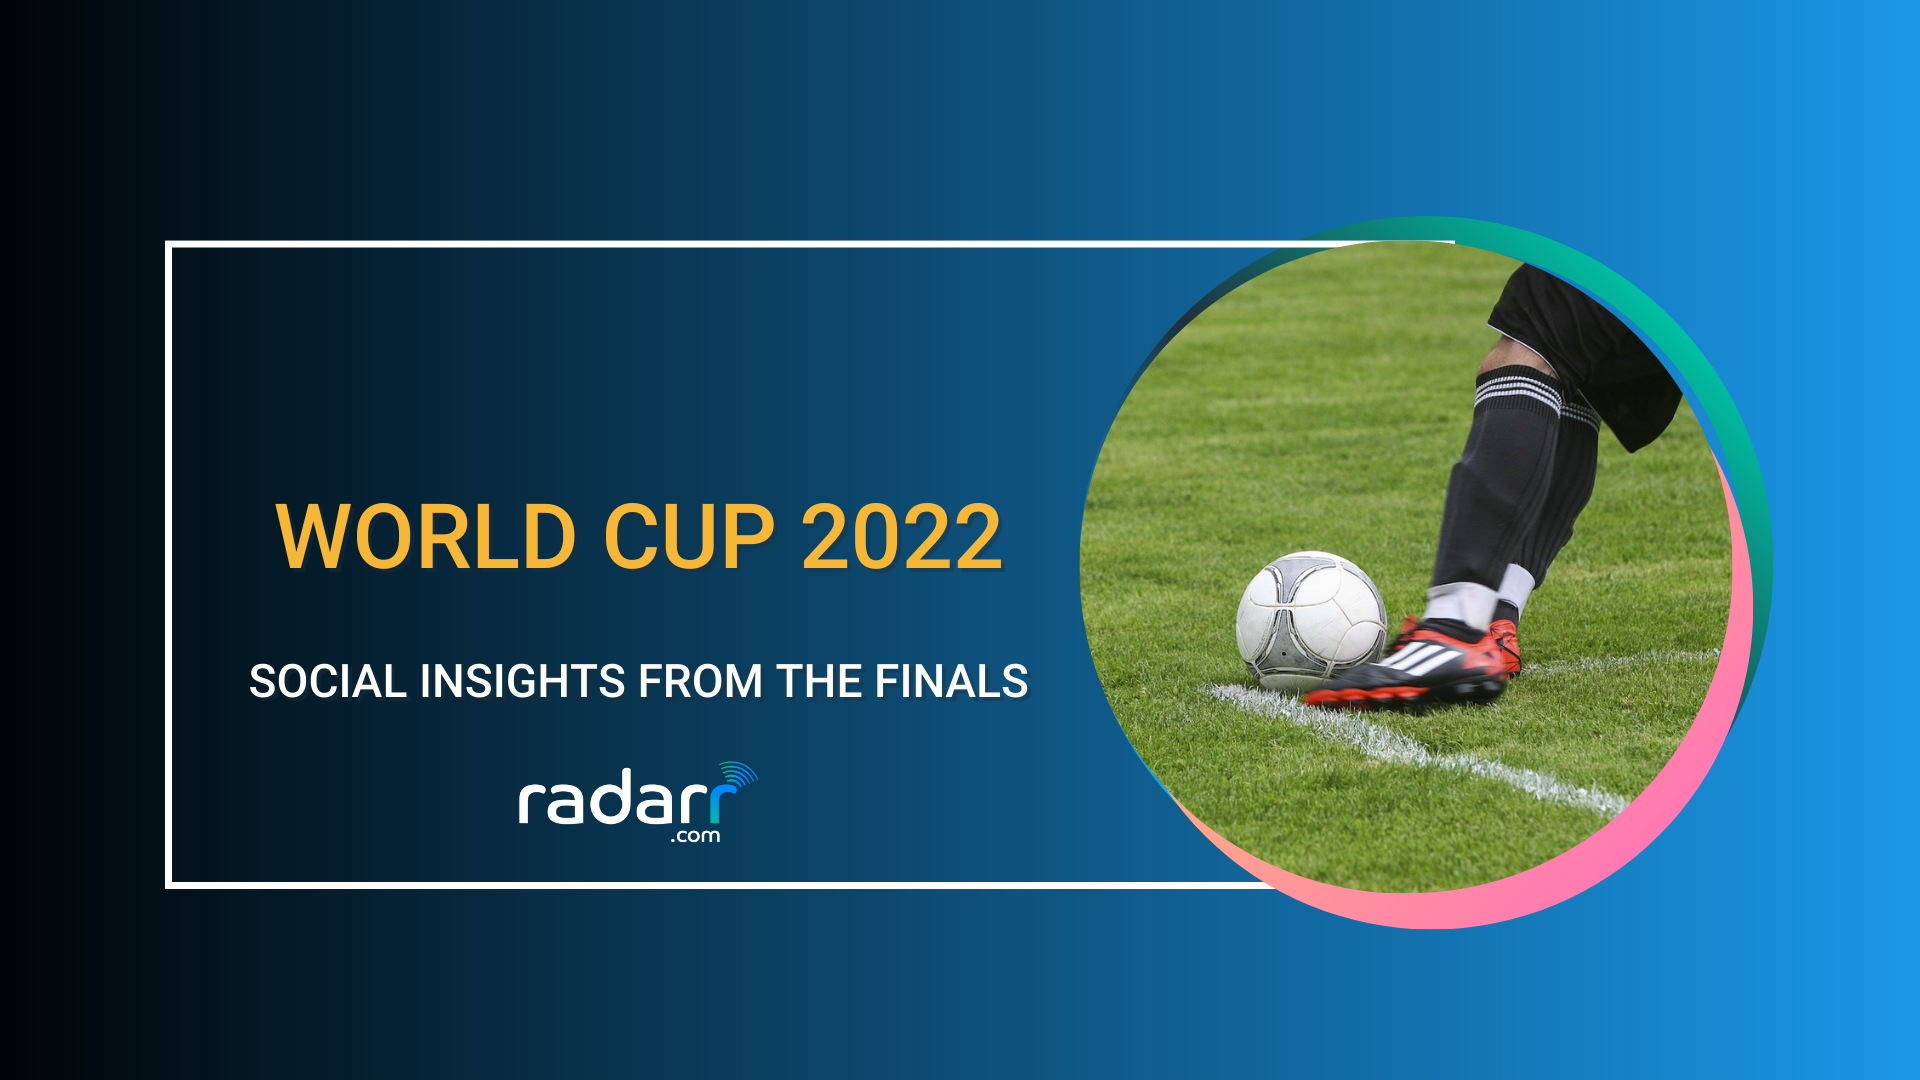 social insights from world cup 2022 finals